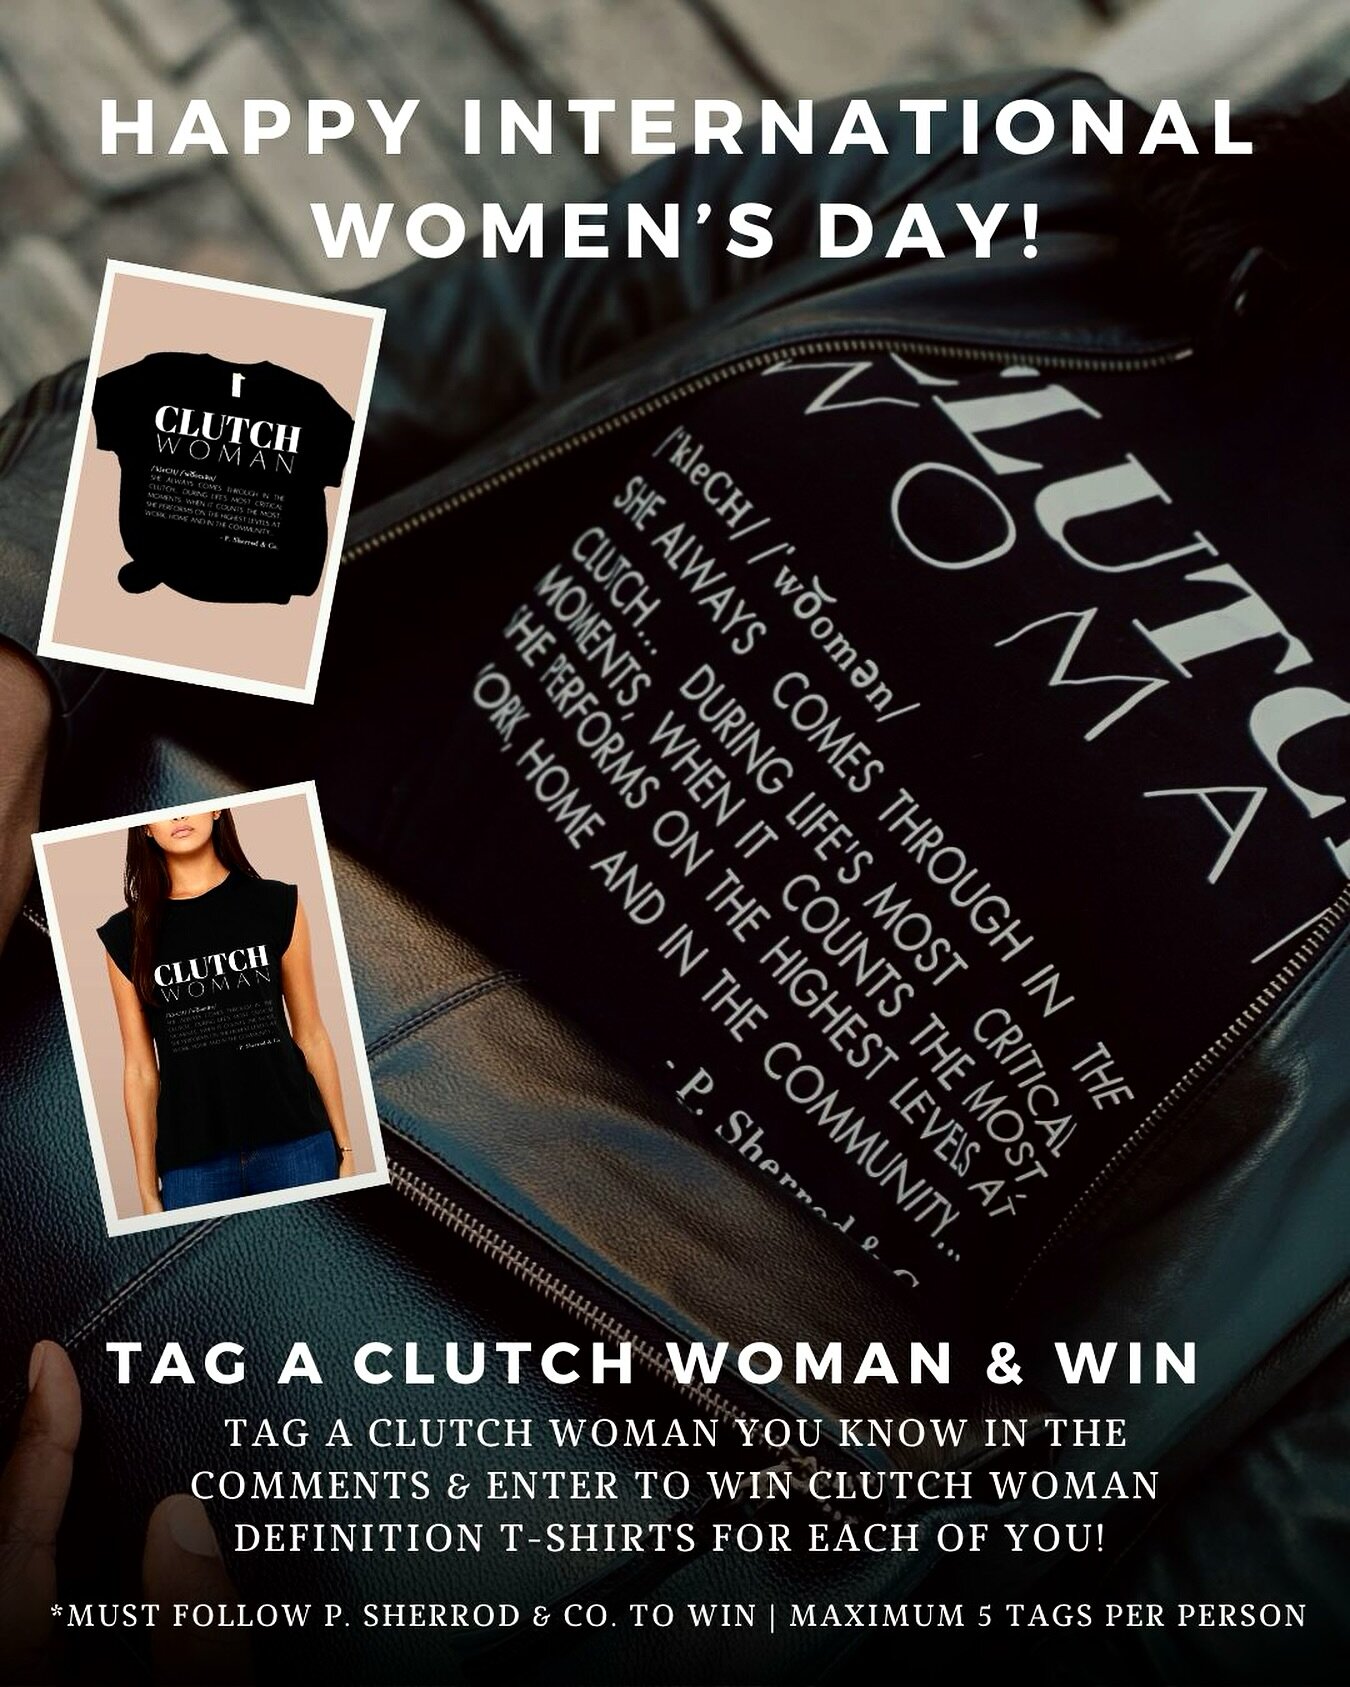 DO YOU KNOW A CLUTCH WOMAN? Tag her in this post and enter to win 2 P. Sherrod &amp; Co. Clutch Woman Definition Tees! 

Definition tee reads: 
&ldquo;SHE ALWAYS COMES THROUGH IN THE CLUTCH... DURING LIFE&rsquo;S MOST CRITICAL MOMENTS, WHEN IT COUNTS